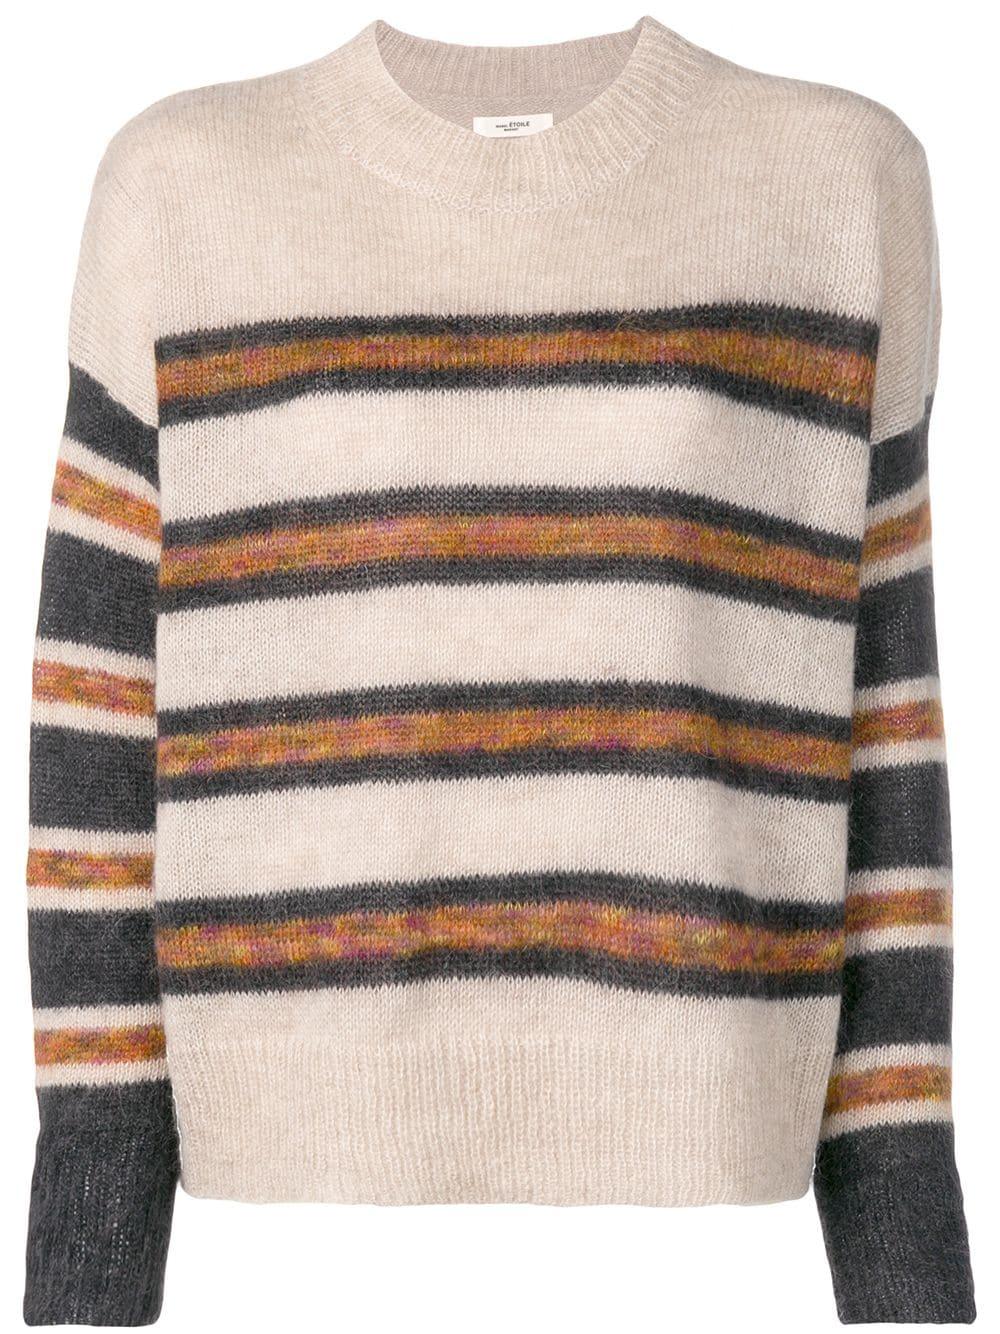 Isabel Marant Étoile Striped Knit Sweater In Nude & Neutrals | ModeSens